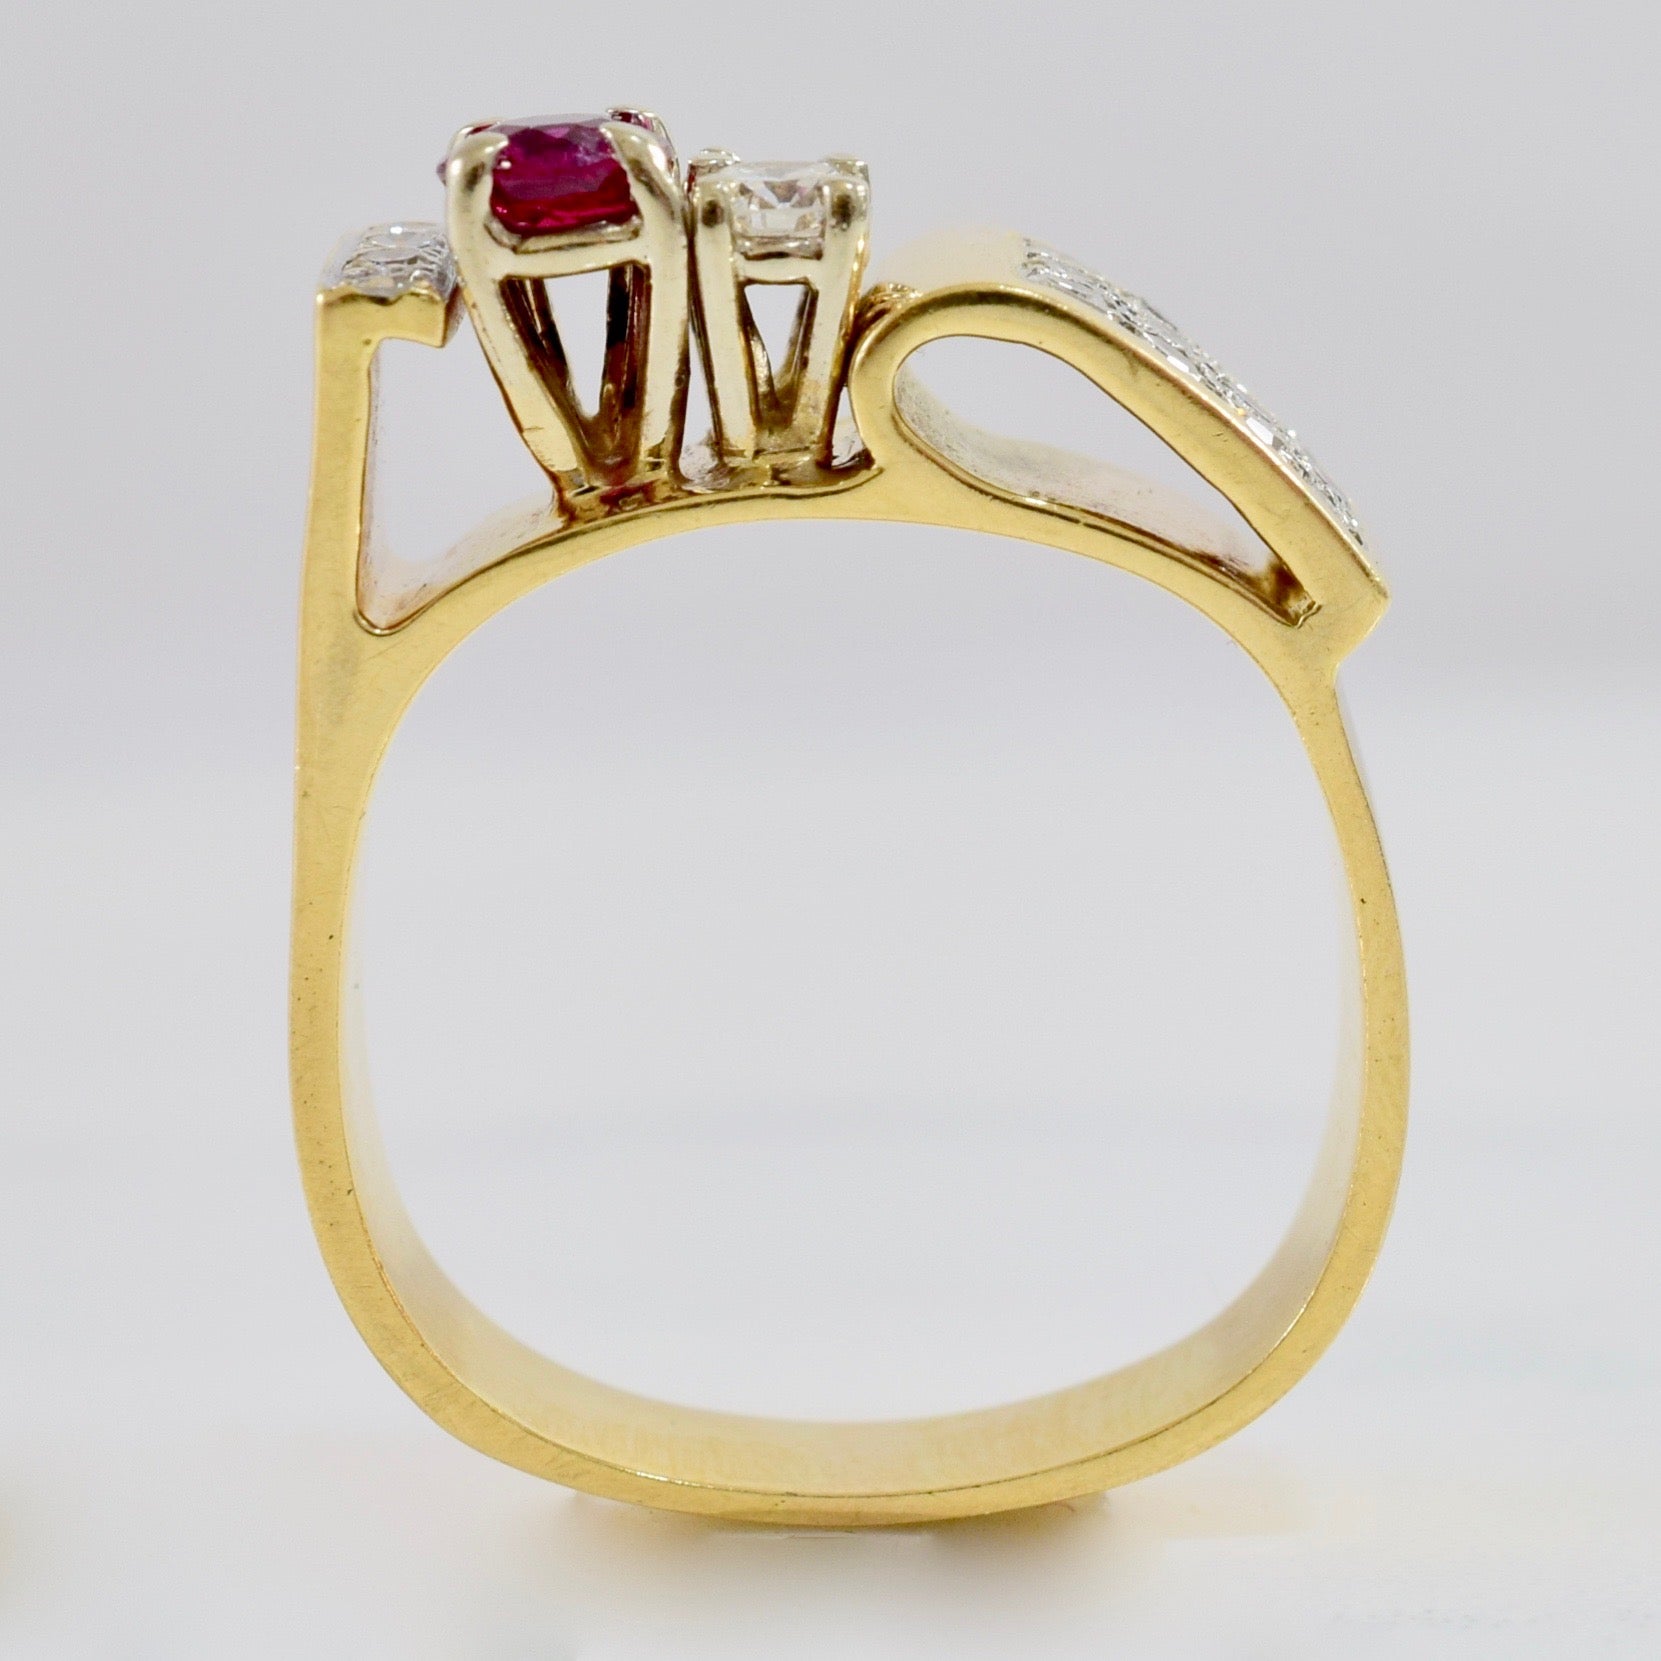 High Set Diamond Cluster and Ruby Ring | 1.0 ctw SZ 8.25 |